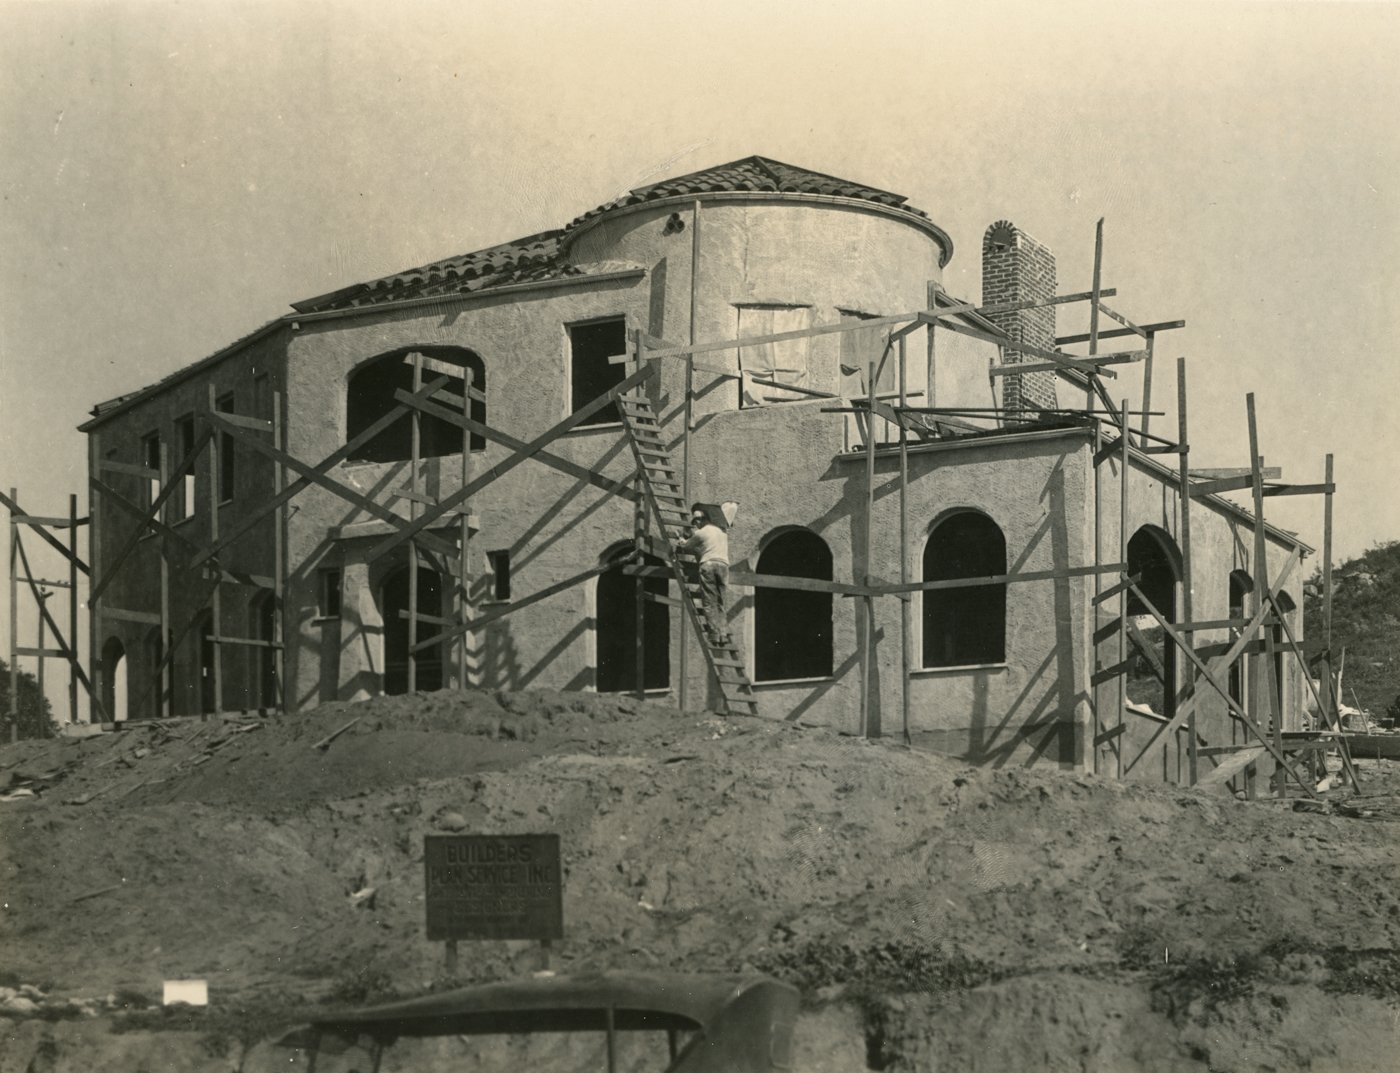 3718 Chevy Chase Drive Under Construction, c. 1926